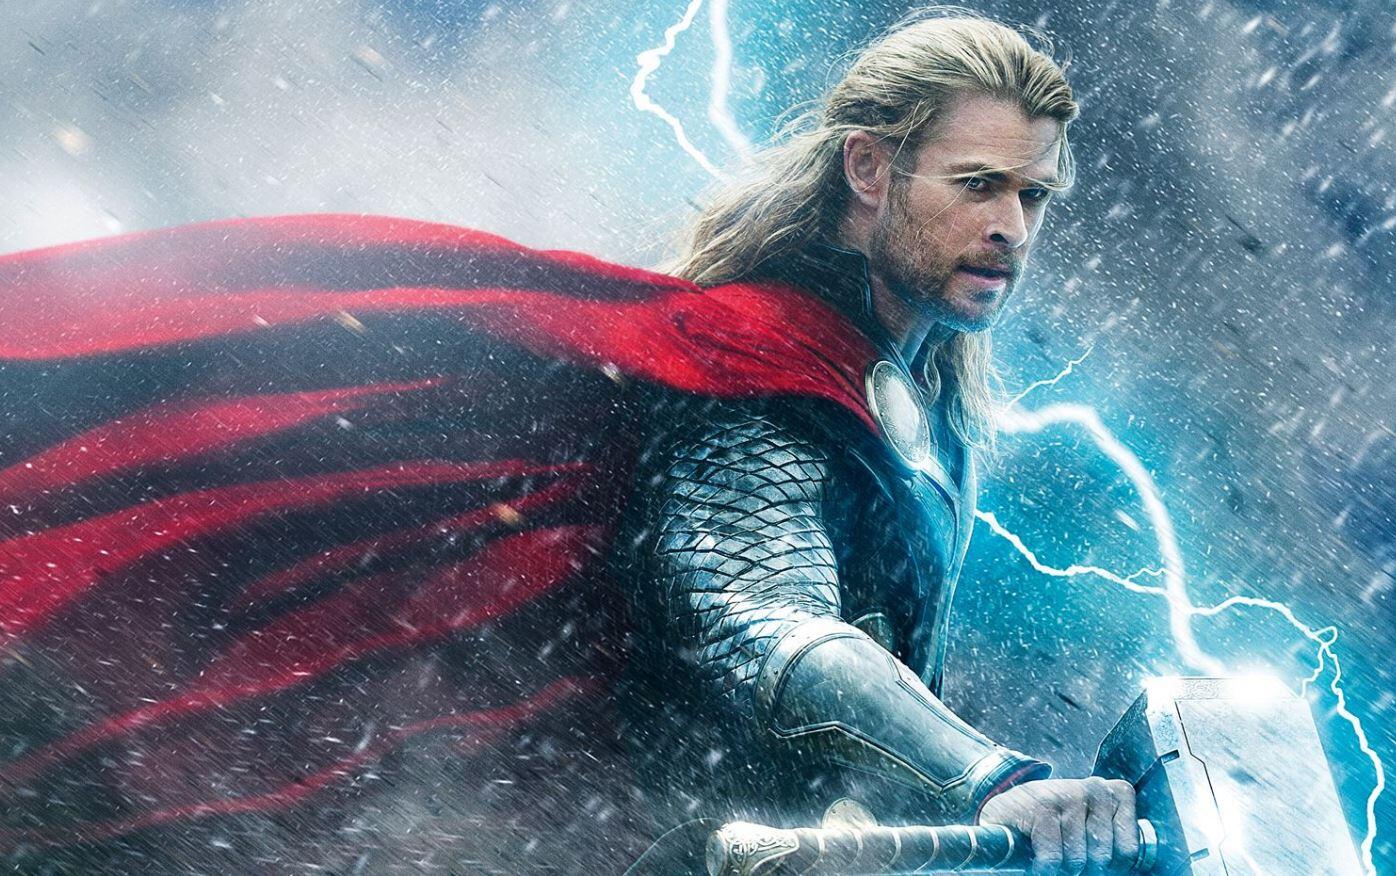 Thor: Love and Thunder Easter eggs you might've missed